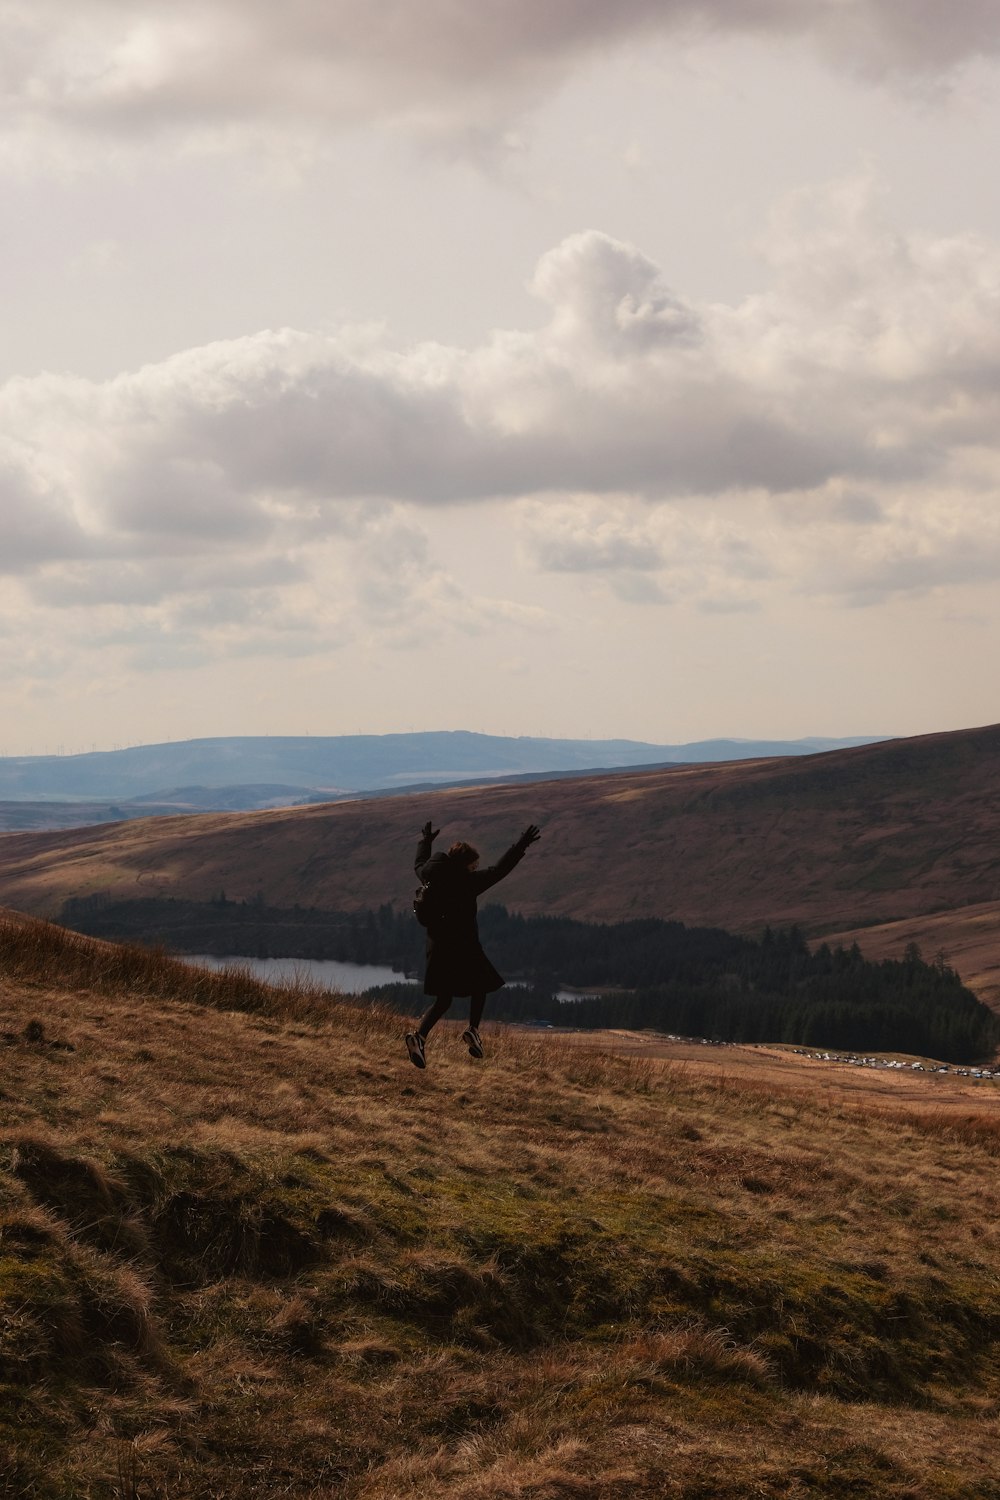 a person jumping in the air on a hill